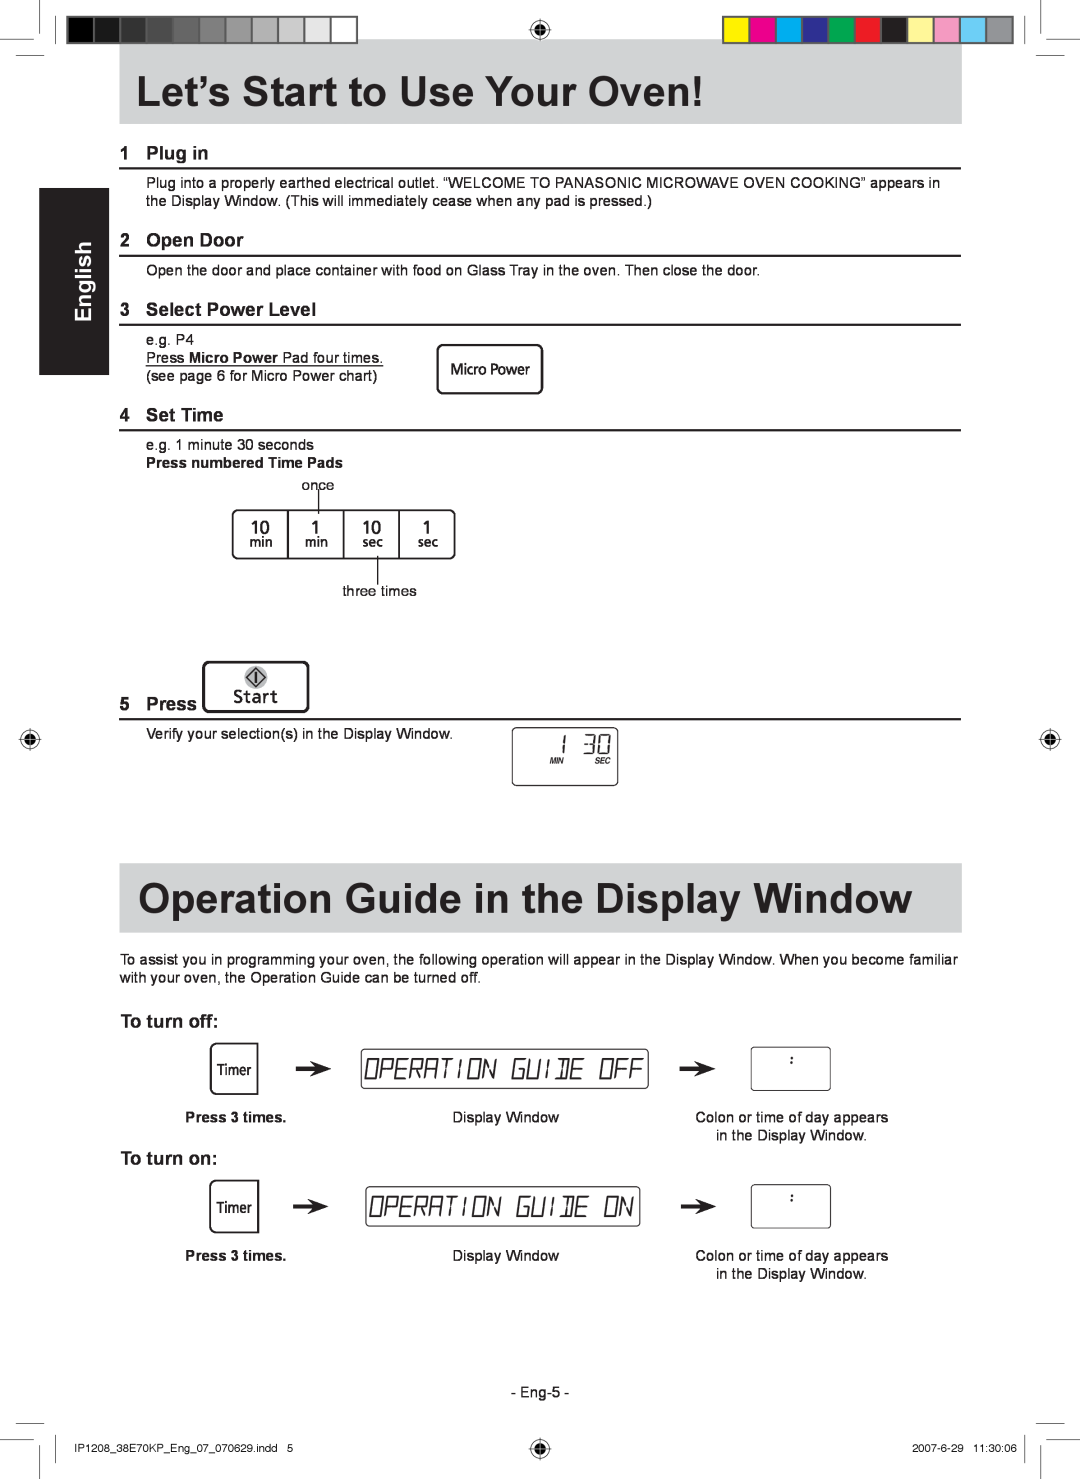 Panasonic NN-ST757W Let’s Start to Use Your Oven, Operation Guide in the Display Window, Plug in, Open Door, Set Time 